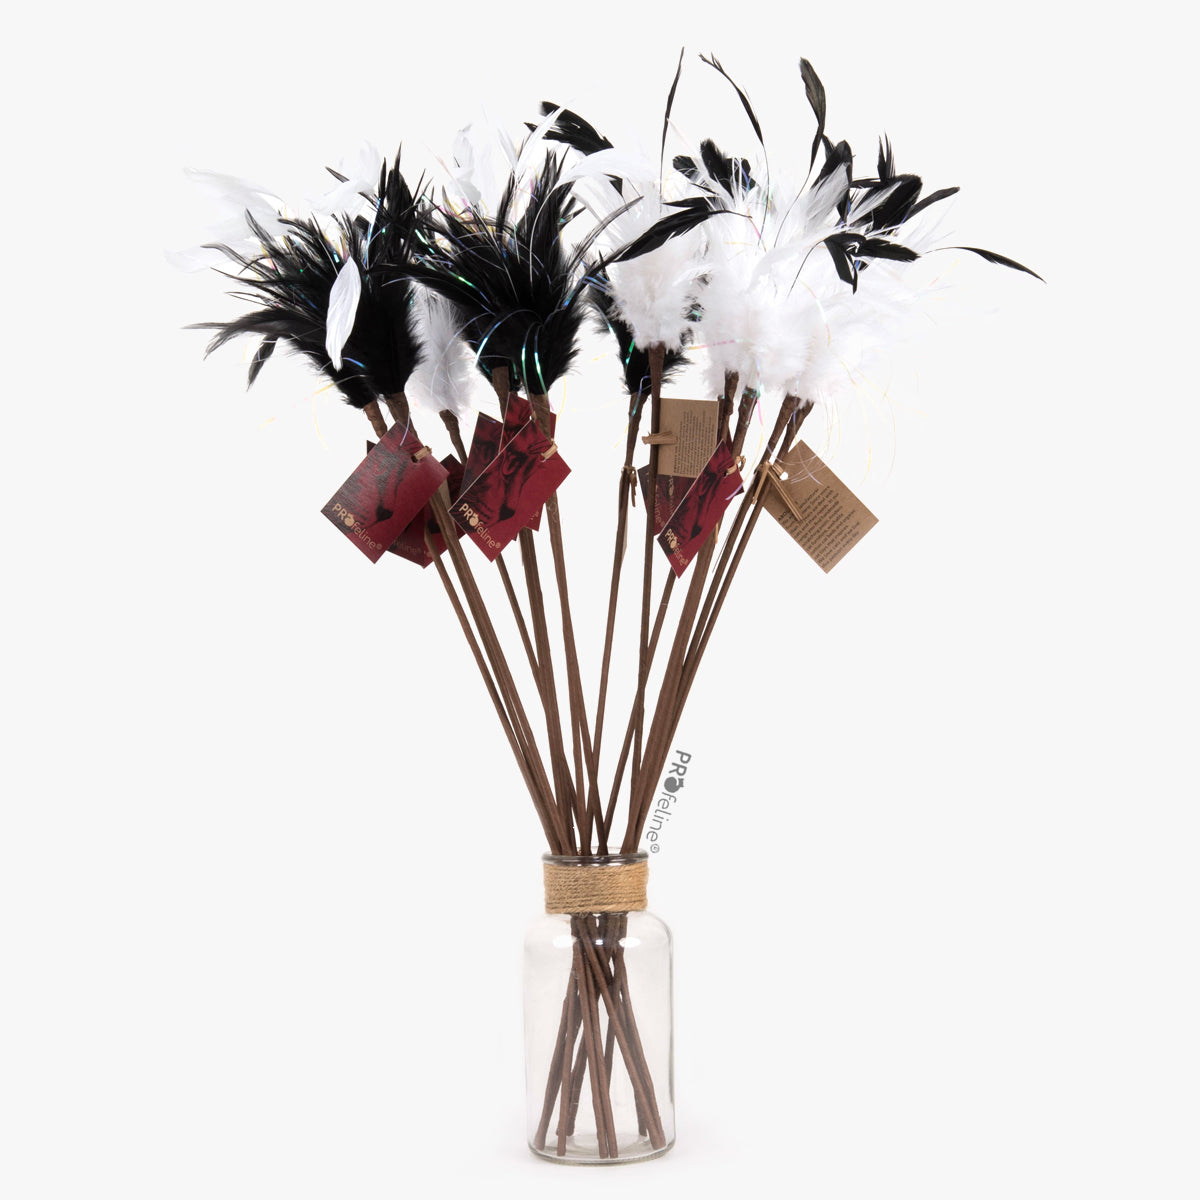 Profeline Teaser Mystic Feathers Cat Toy with Black or White Feathers | at Made Moggie